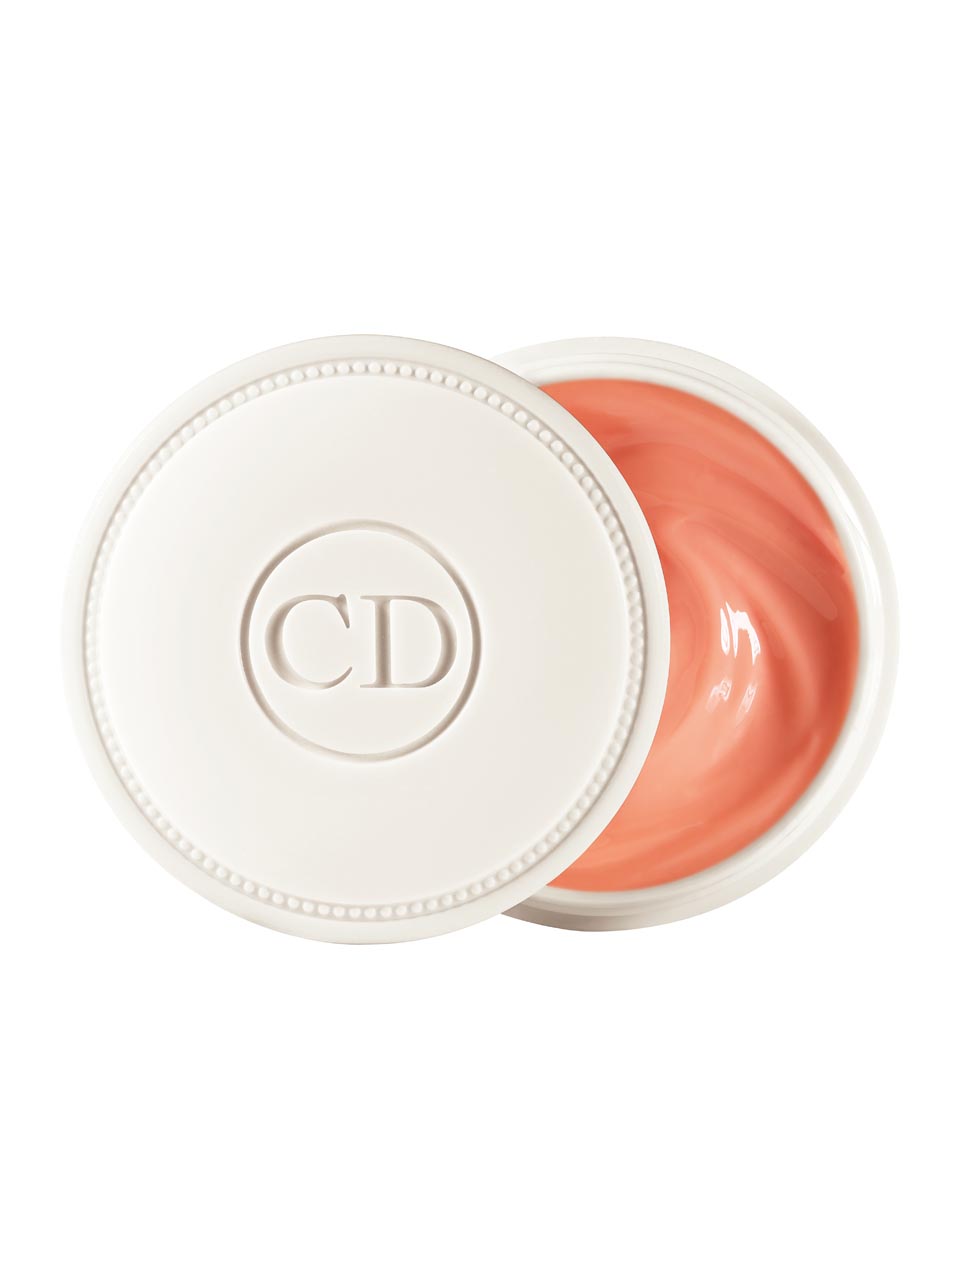 Dior Vernis Nail Polish Crème Abricot Fortifying Creme for Nails 10 g null - onesize - 1